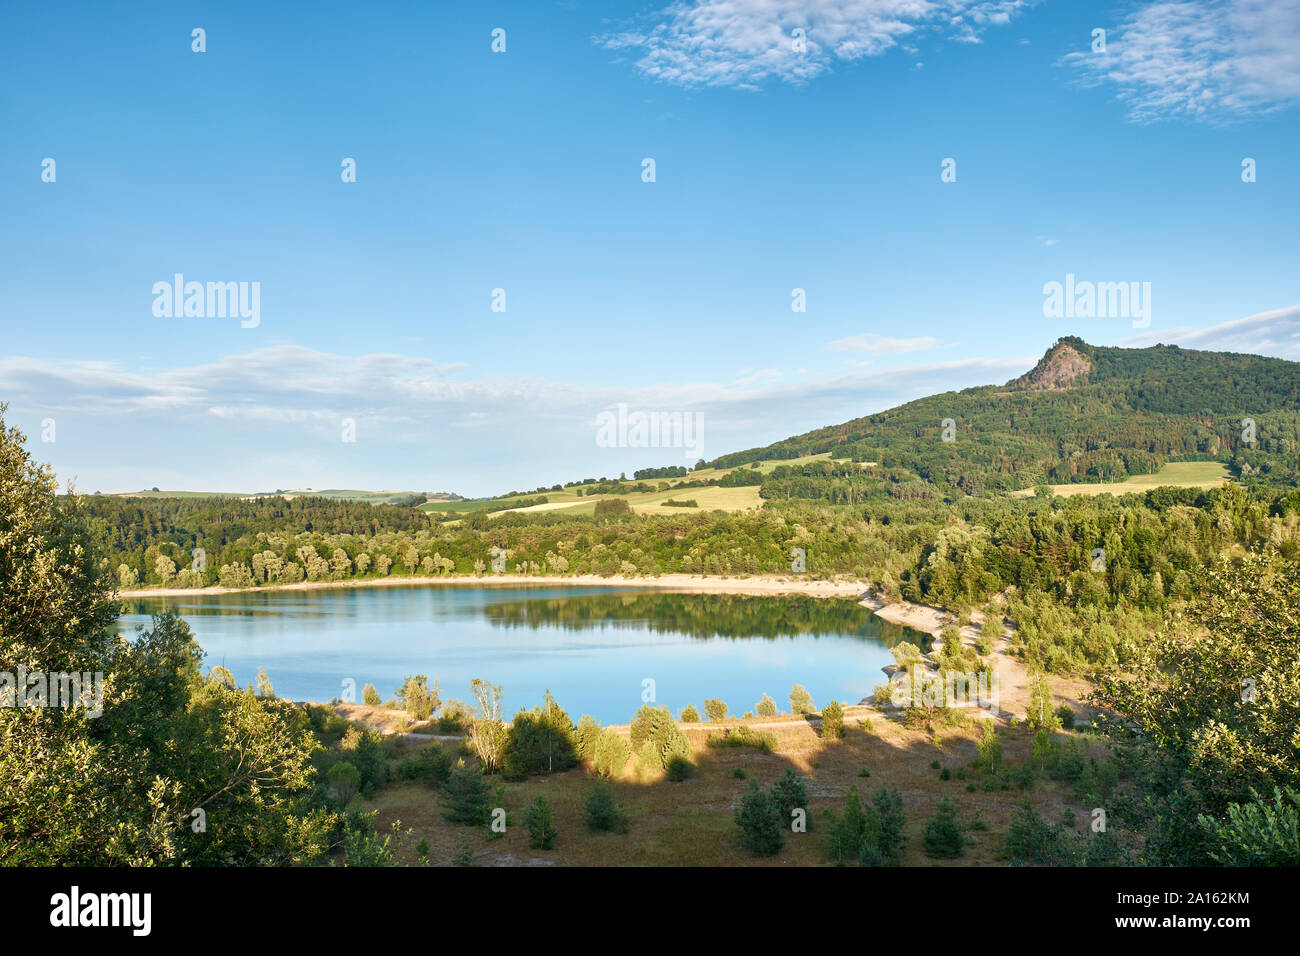 View over Binninger See and Volcanic Landscape Hegau, Germany Stock Photo